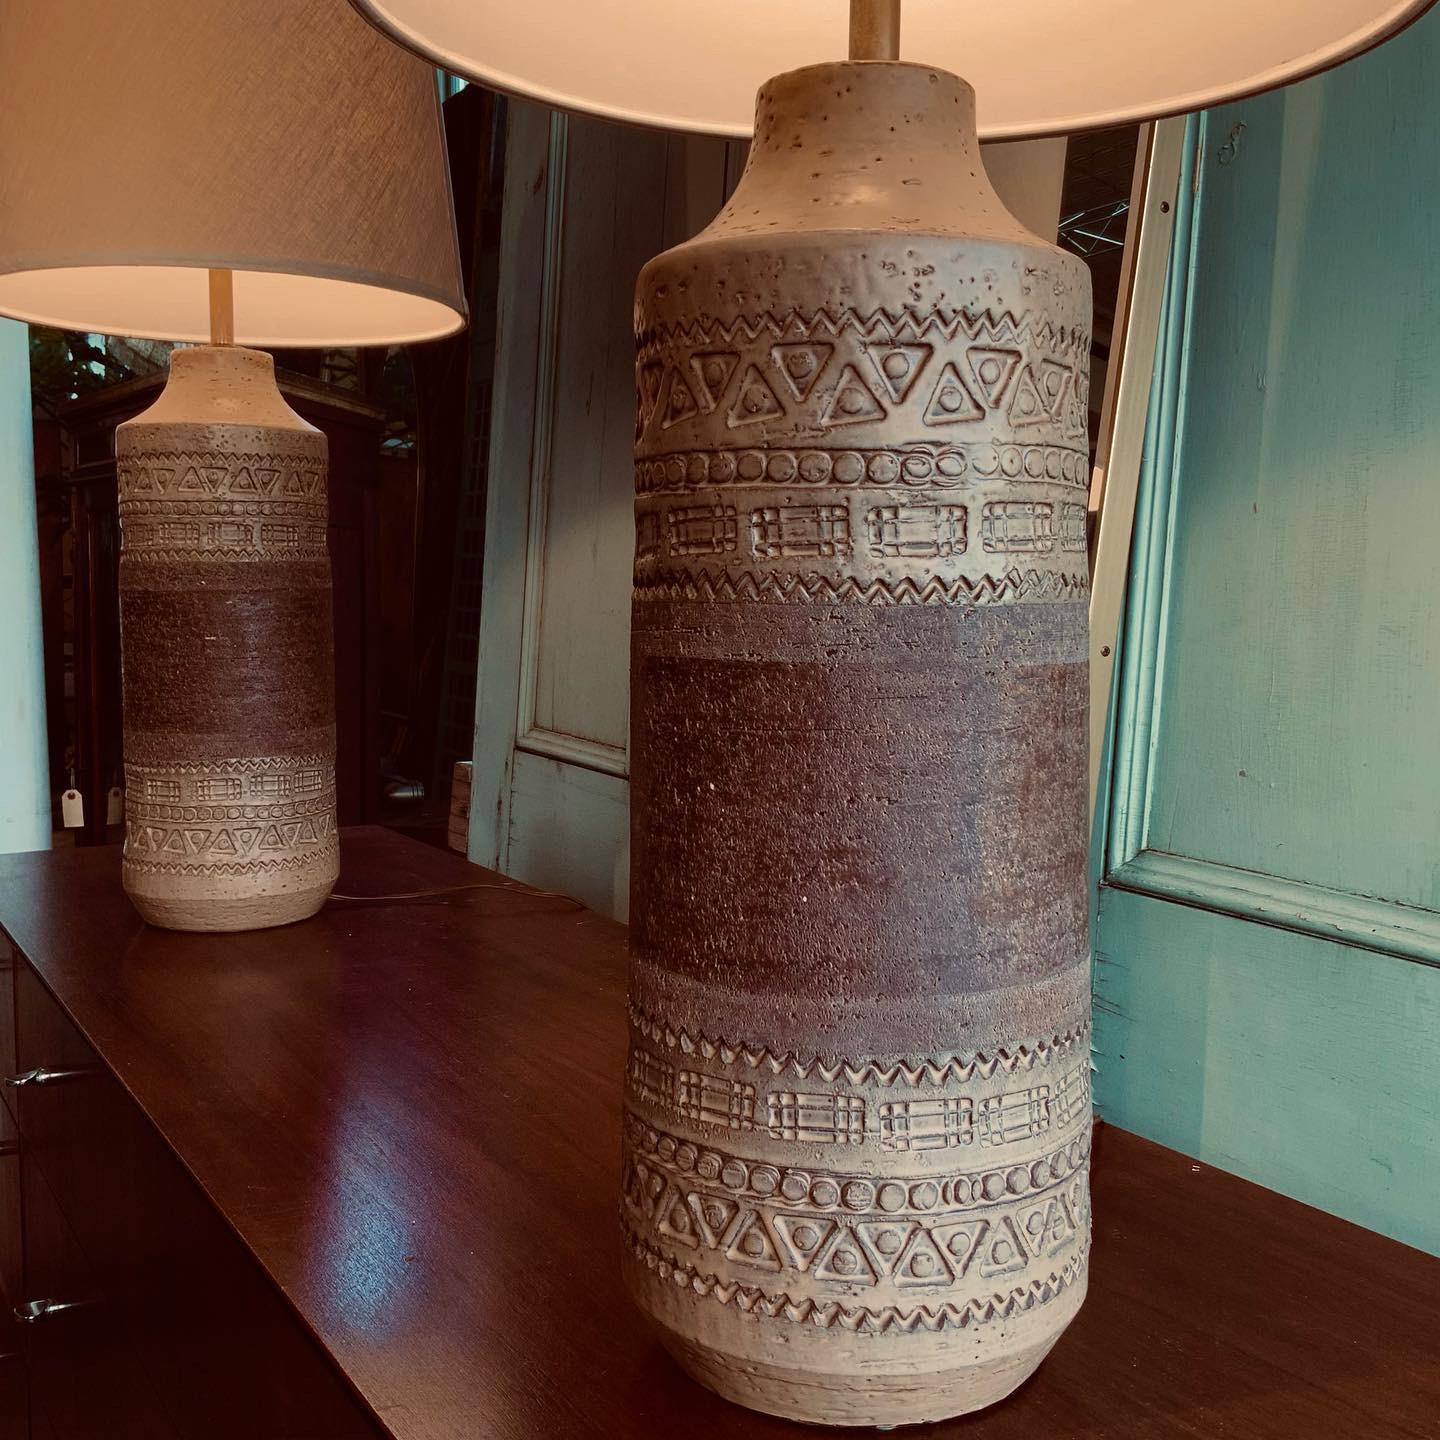 A beautiful matched pair of vintage 1960's Italian ceramic lamps by Bitossi - great design and details. the large cylinder shaped bases have repeating geometric patterns, and an unglazed section in the center -- beautifully made and in mint